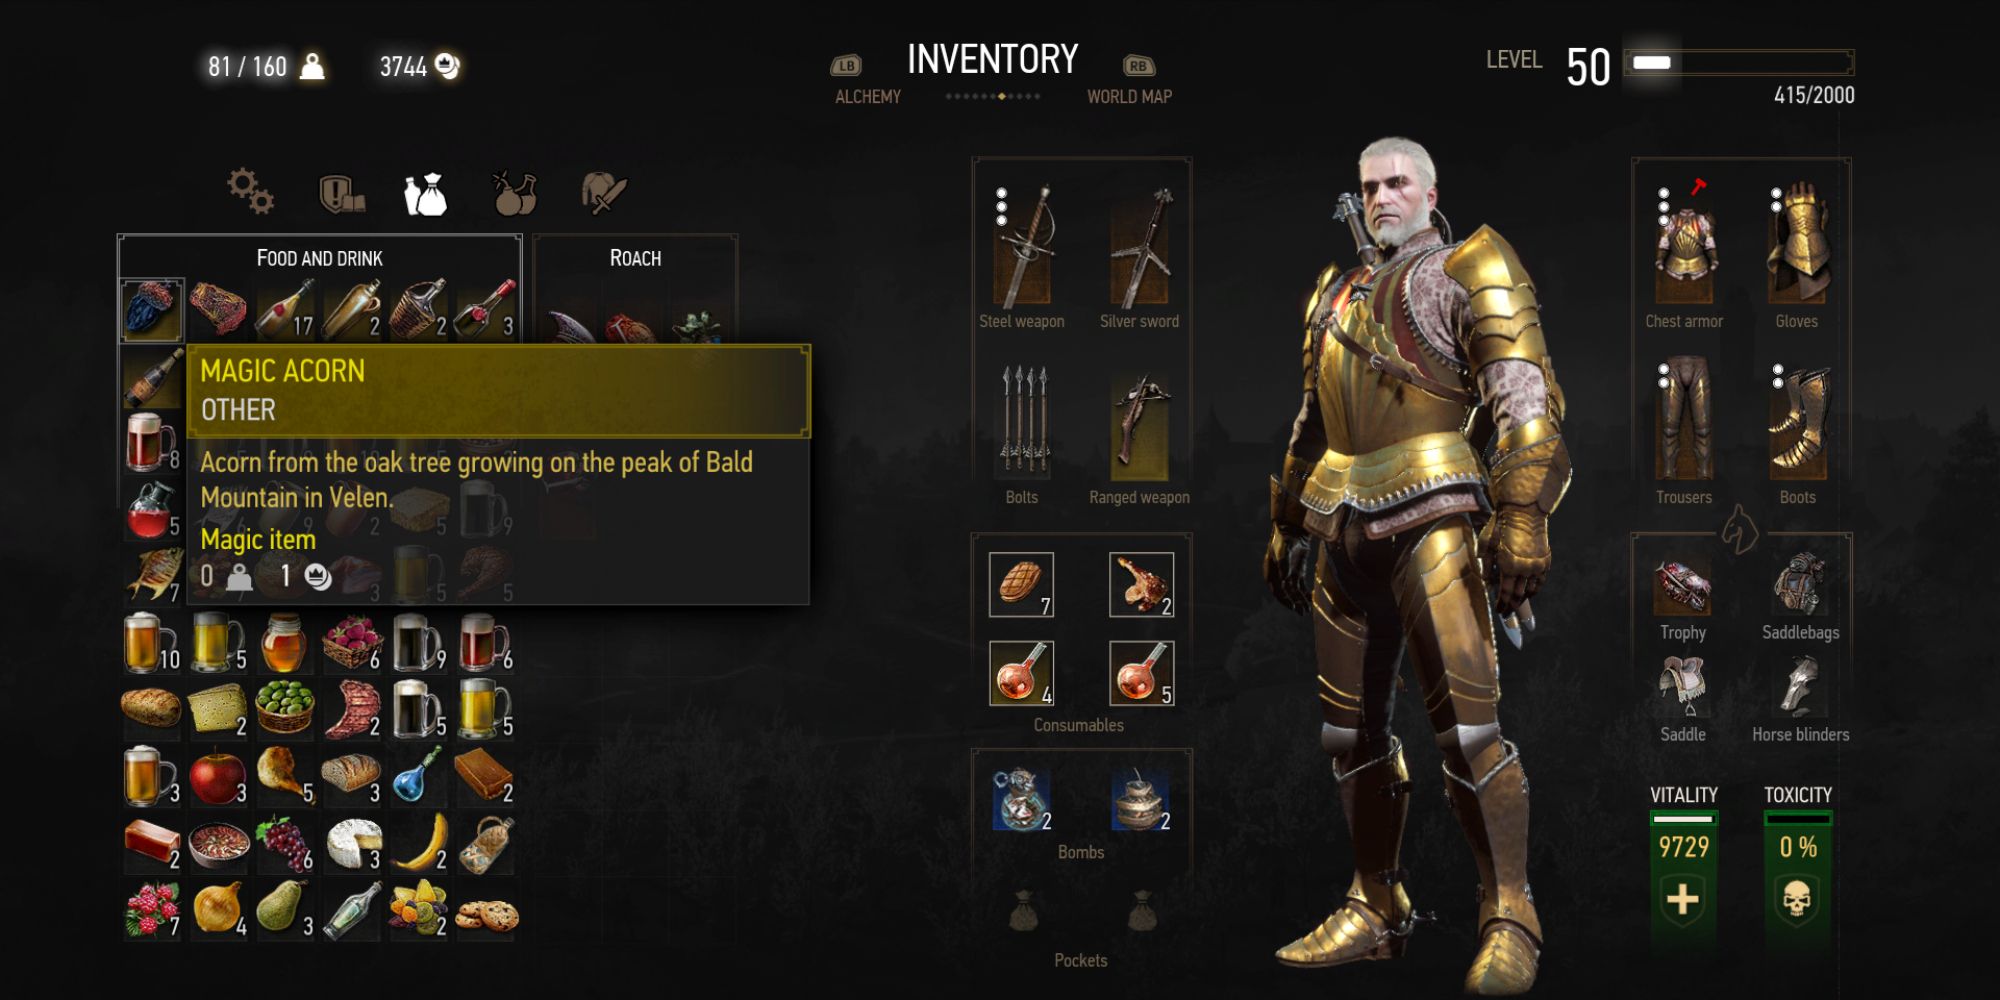 The Witcher 3 Screenshot Of Magic Acorn In Inventory